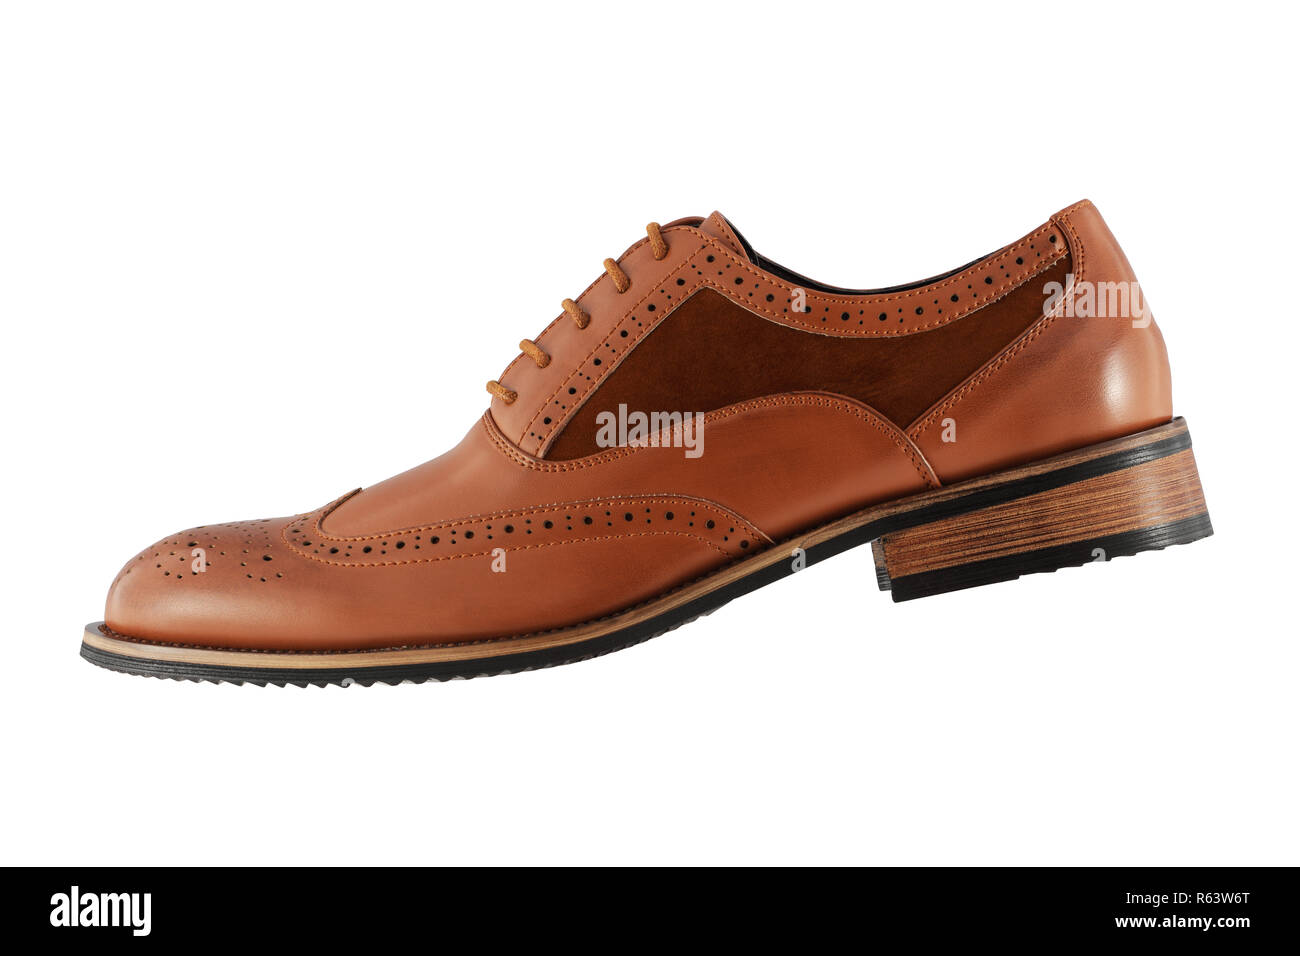 Mens brown shoe side view on a white background Stock Photo